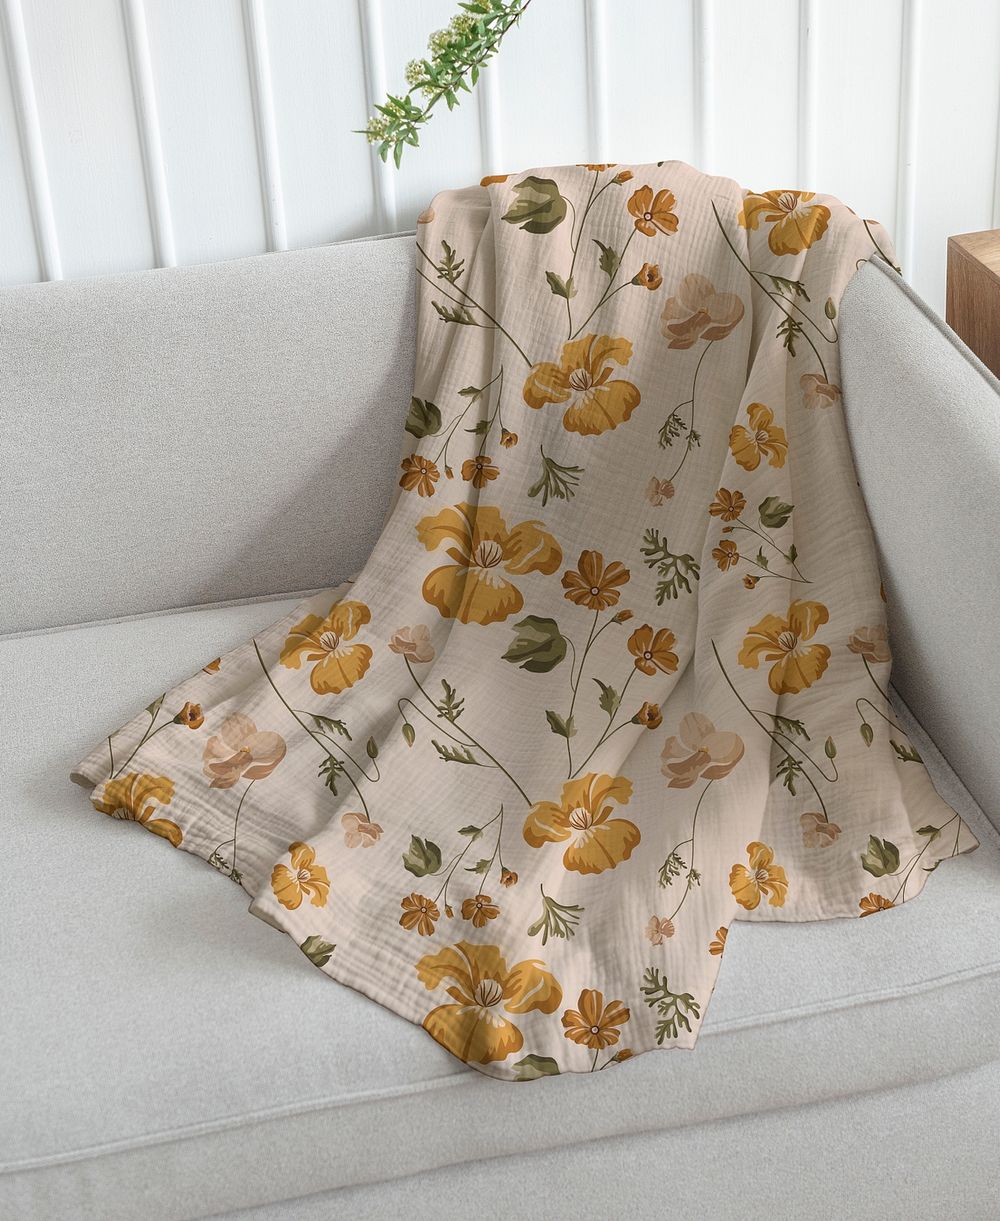 Throw blanket mockup psd in floral pattern living concept